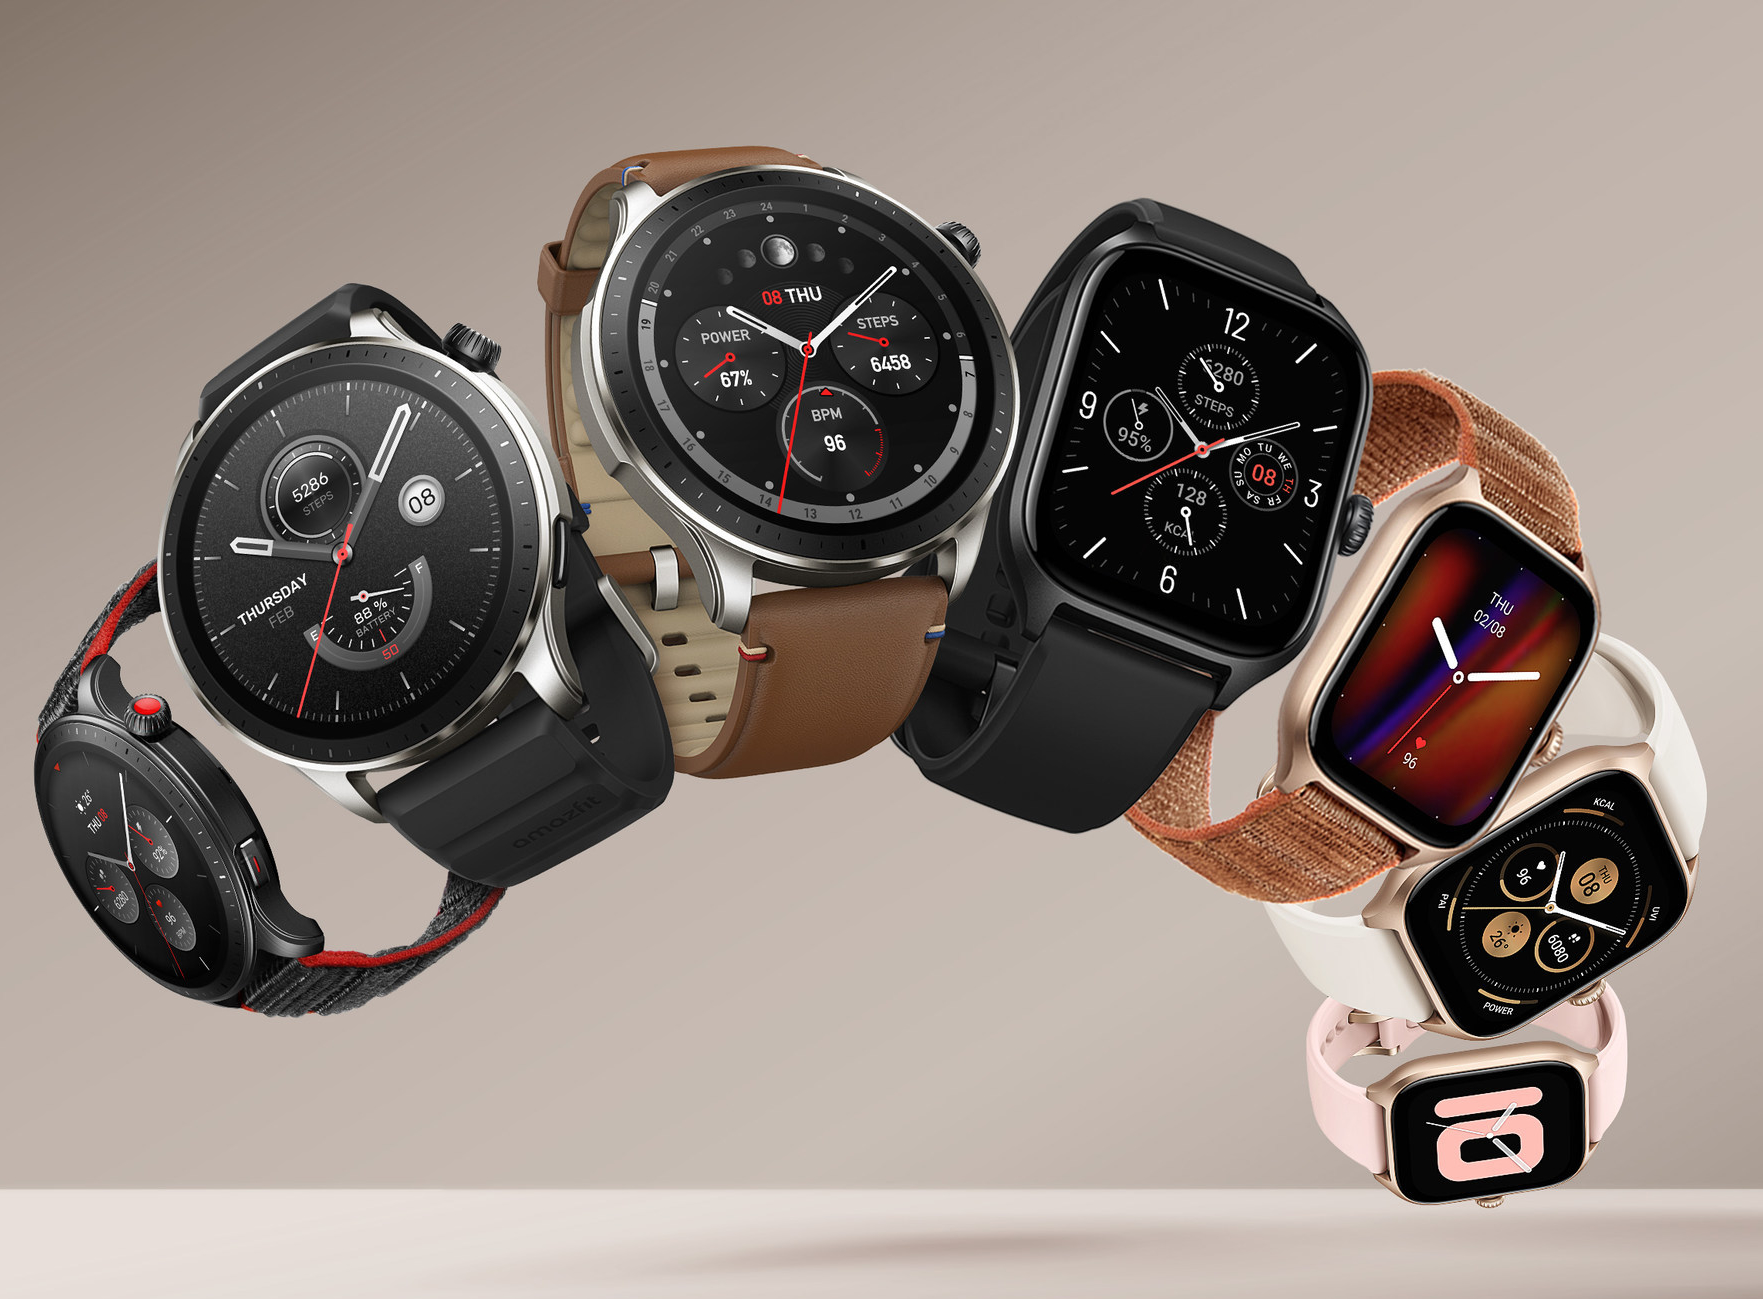 Amazfit brings new heart rate algorithm with enhanced accuracy to popular  smartwatches via latest update -  News